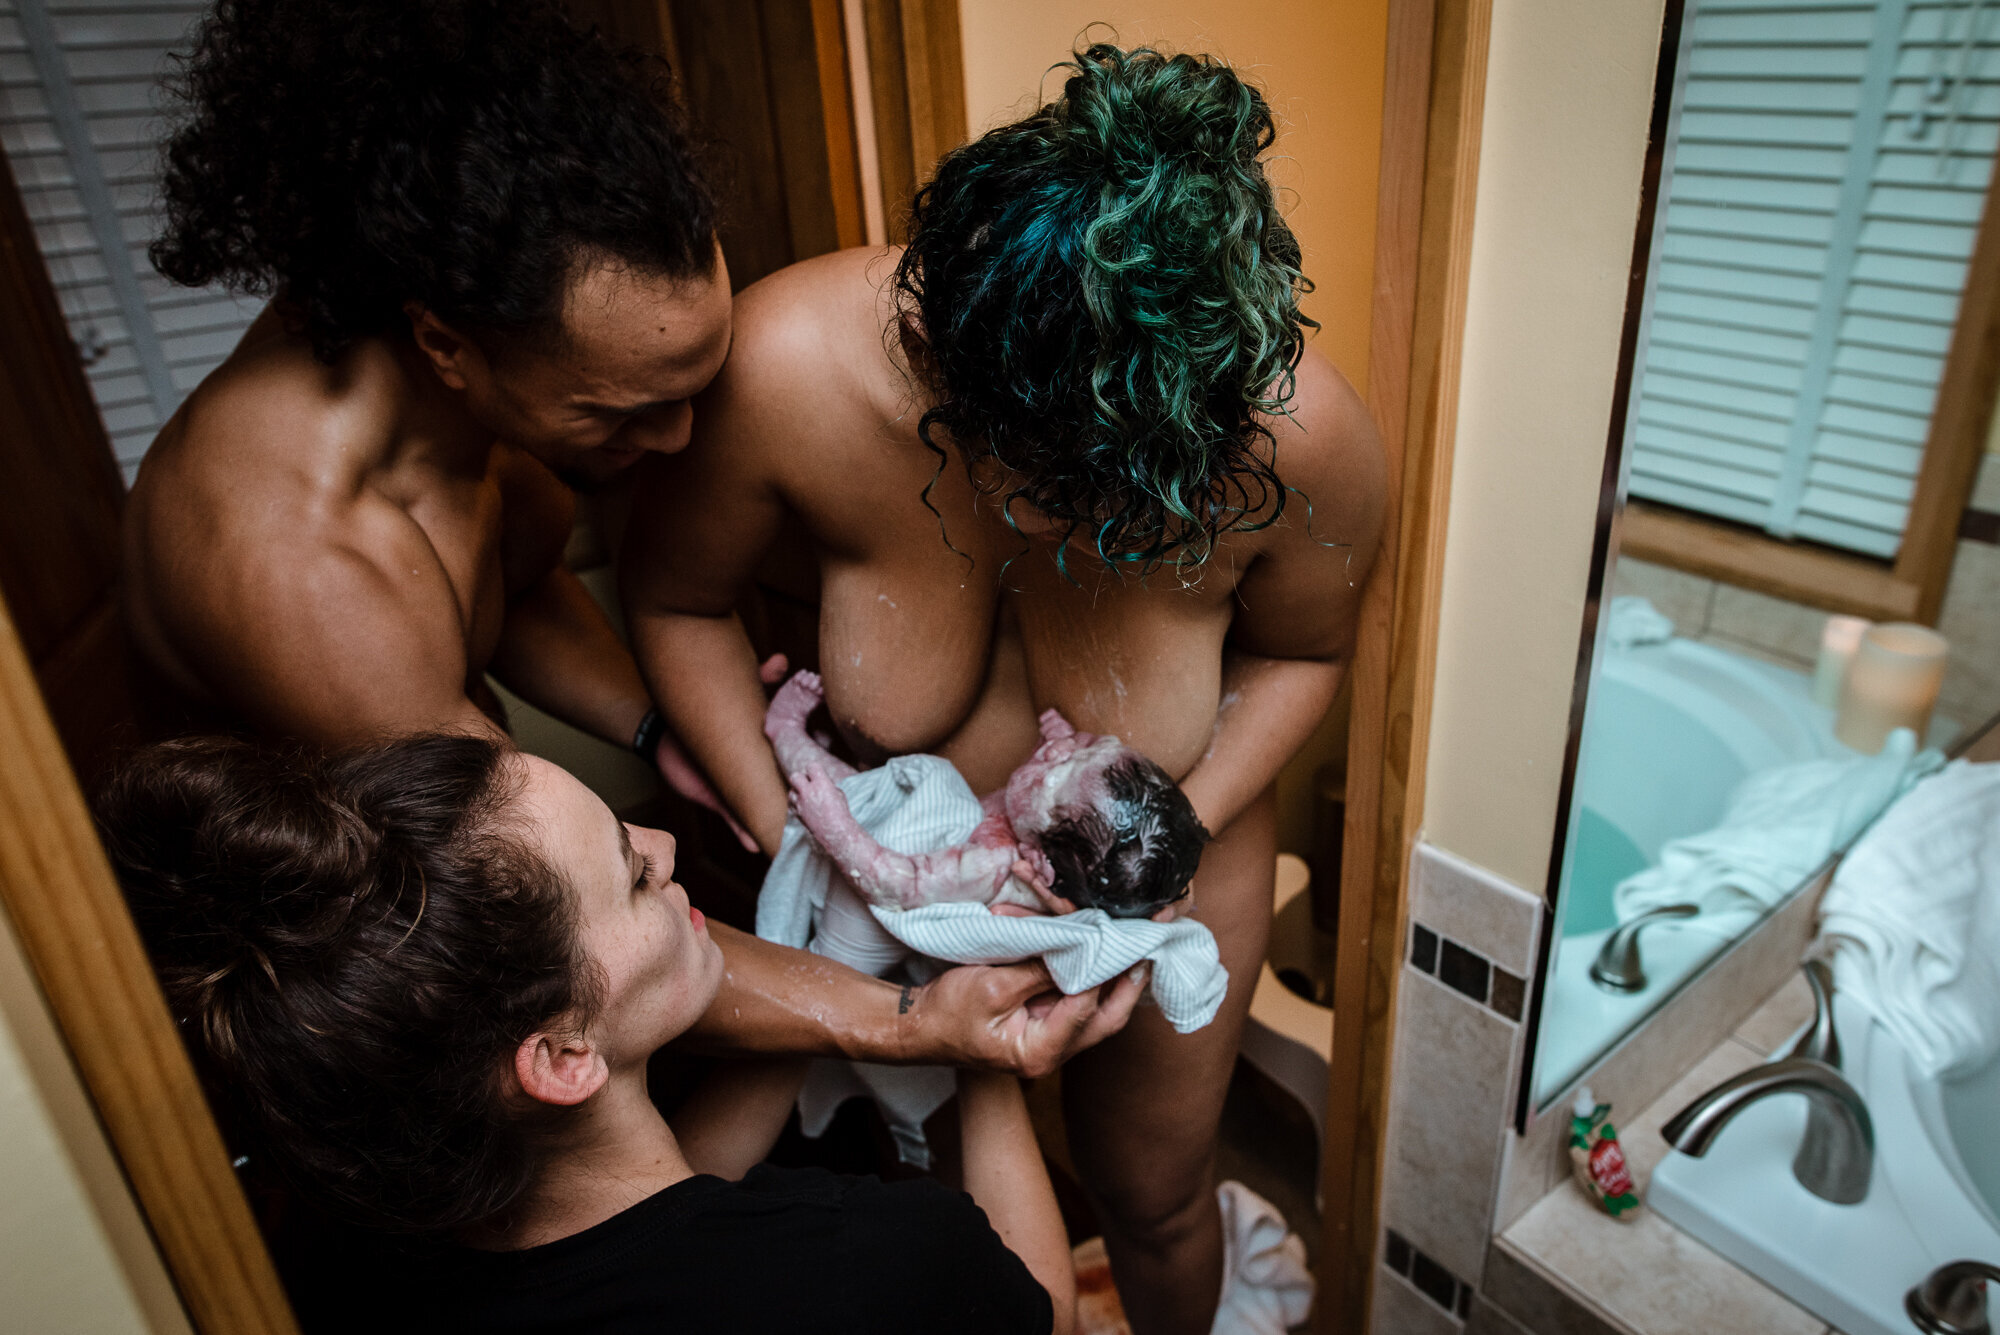 Gather+Birth+Cooperative-+Photography+and+Doula+Support+-October+04,+2019-015017.jpg